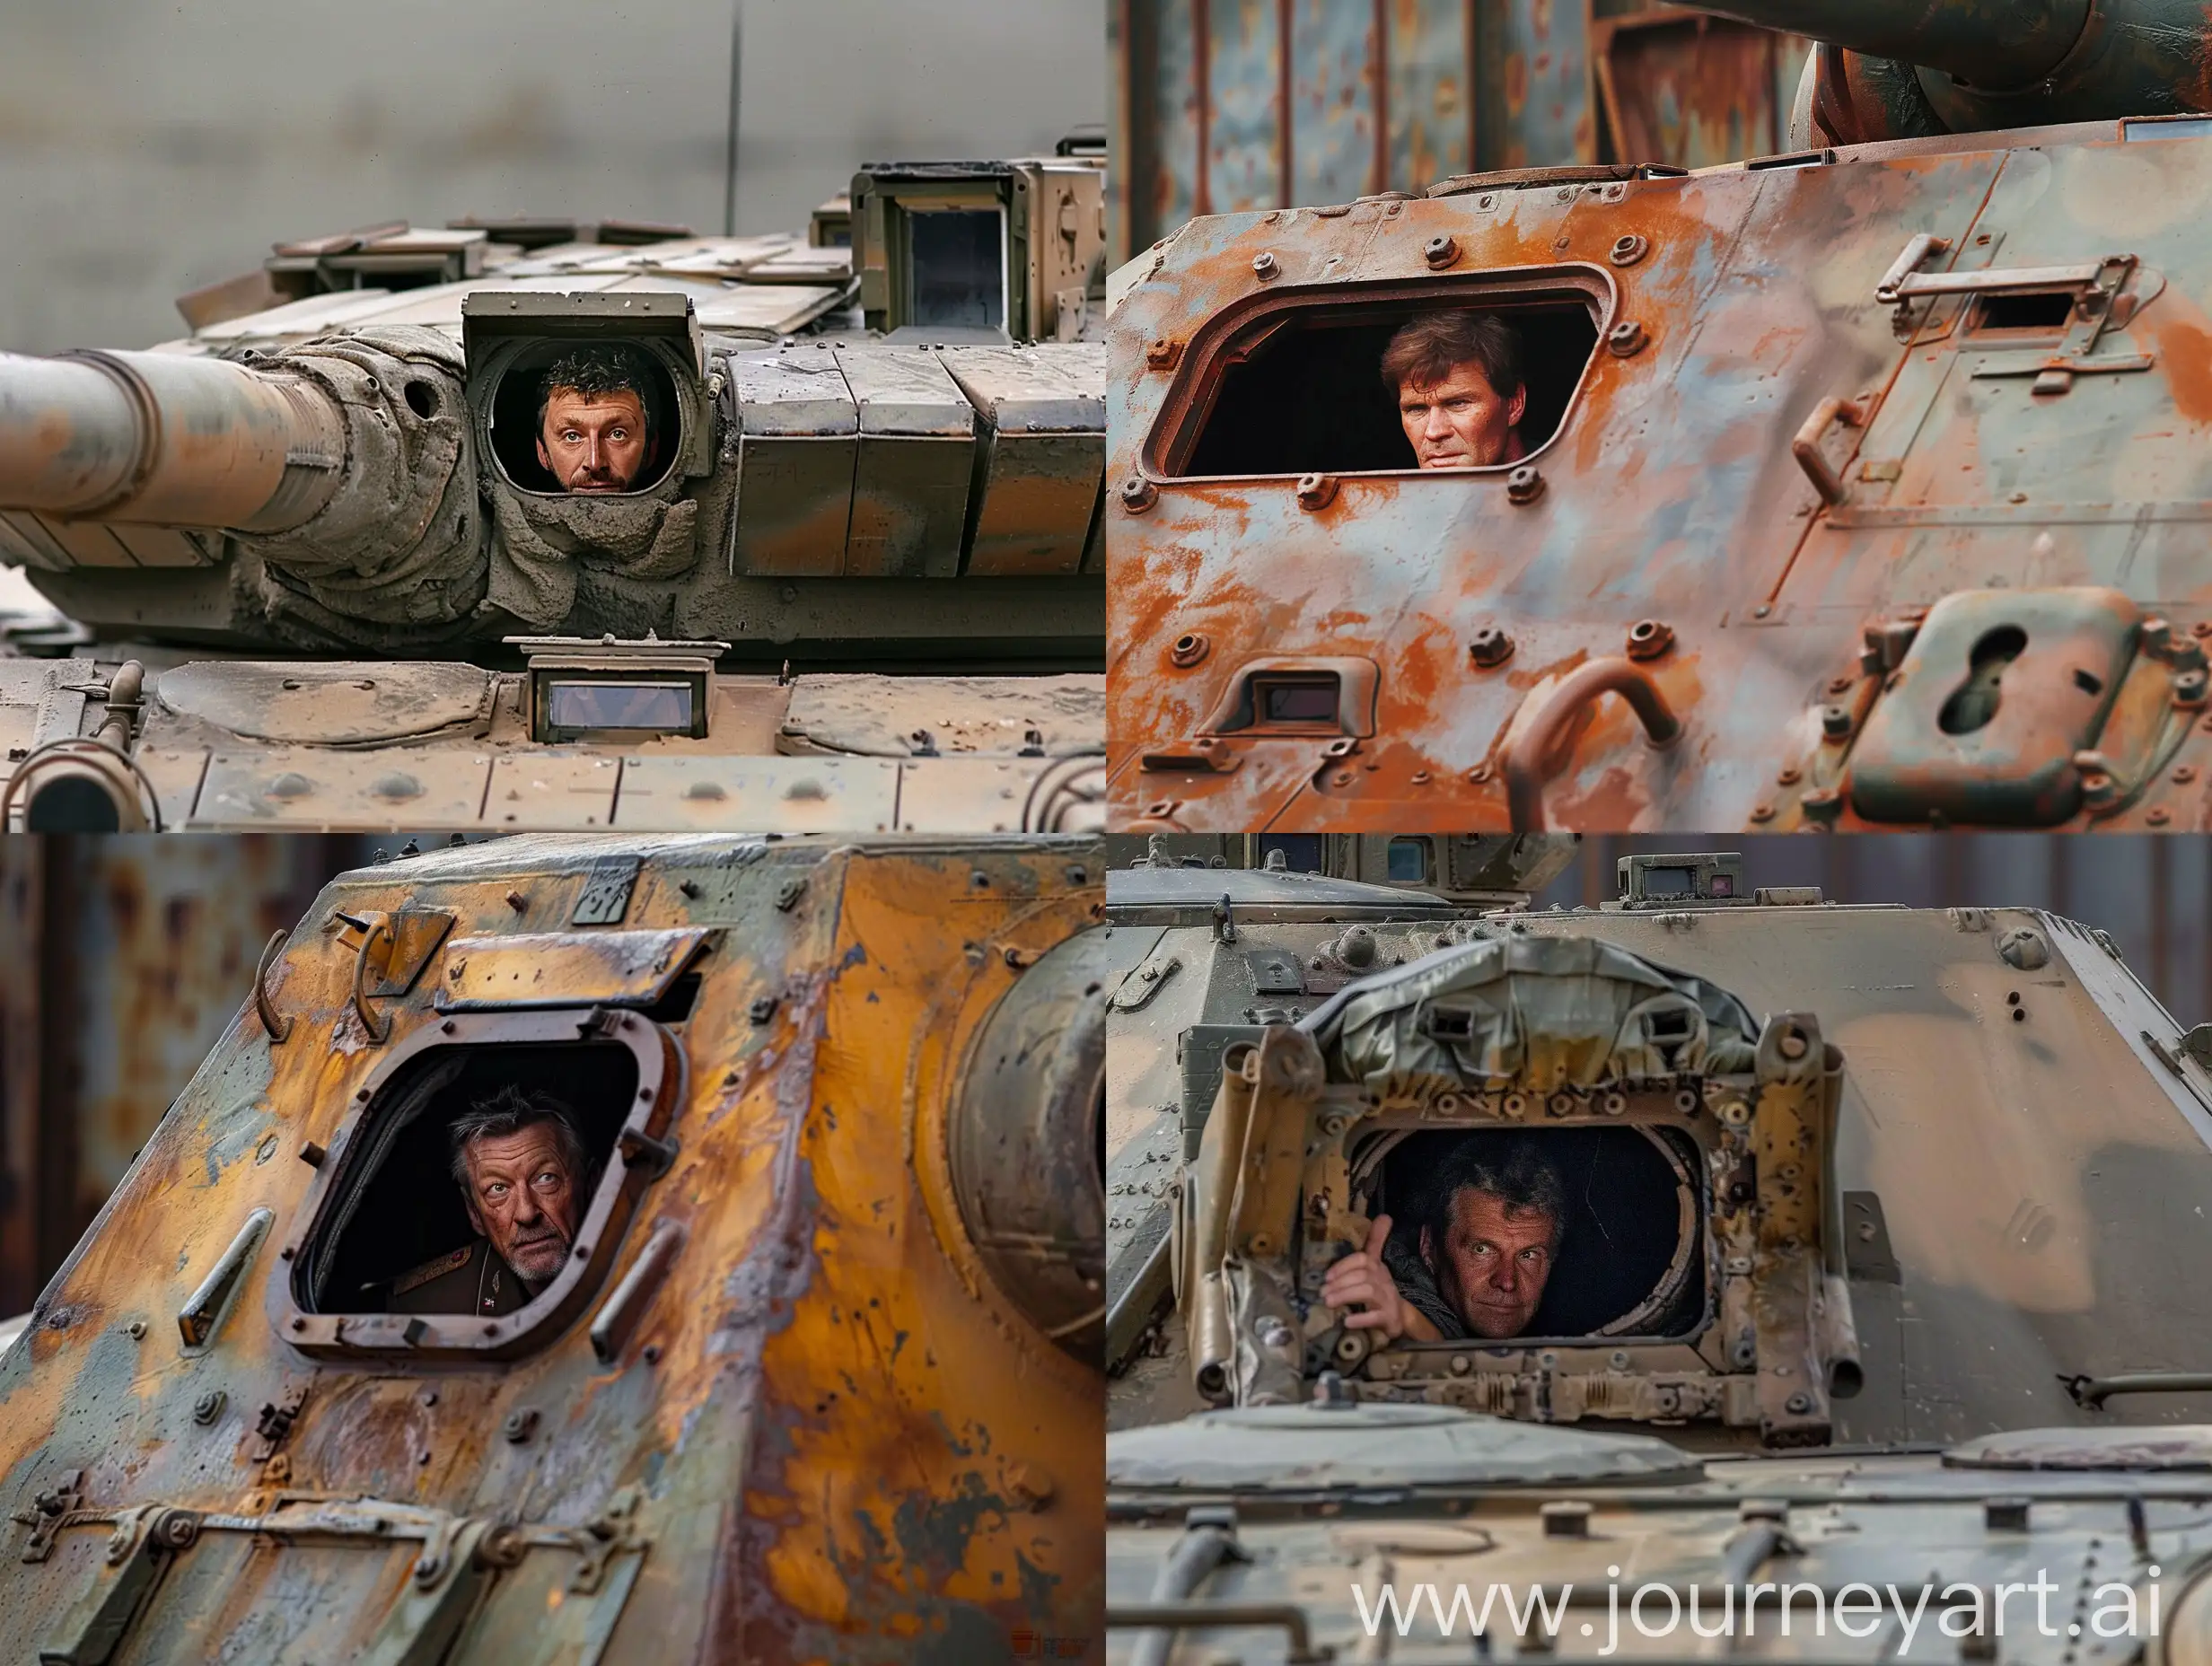 Generate a photo of a Soviet SU-152 tank with American  actor Billy Herrington peering out of the hatch.